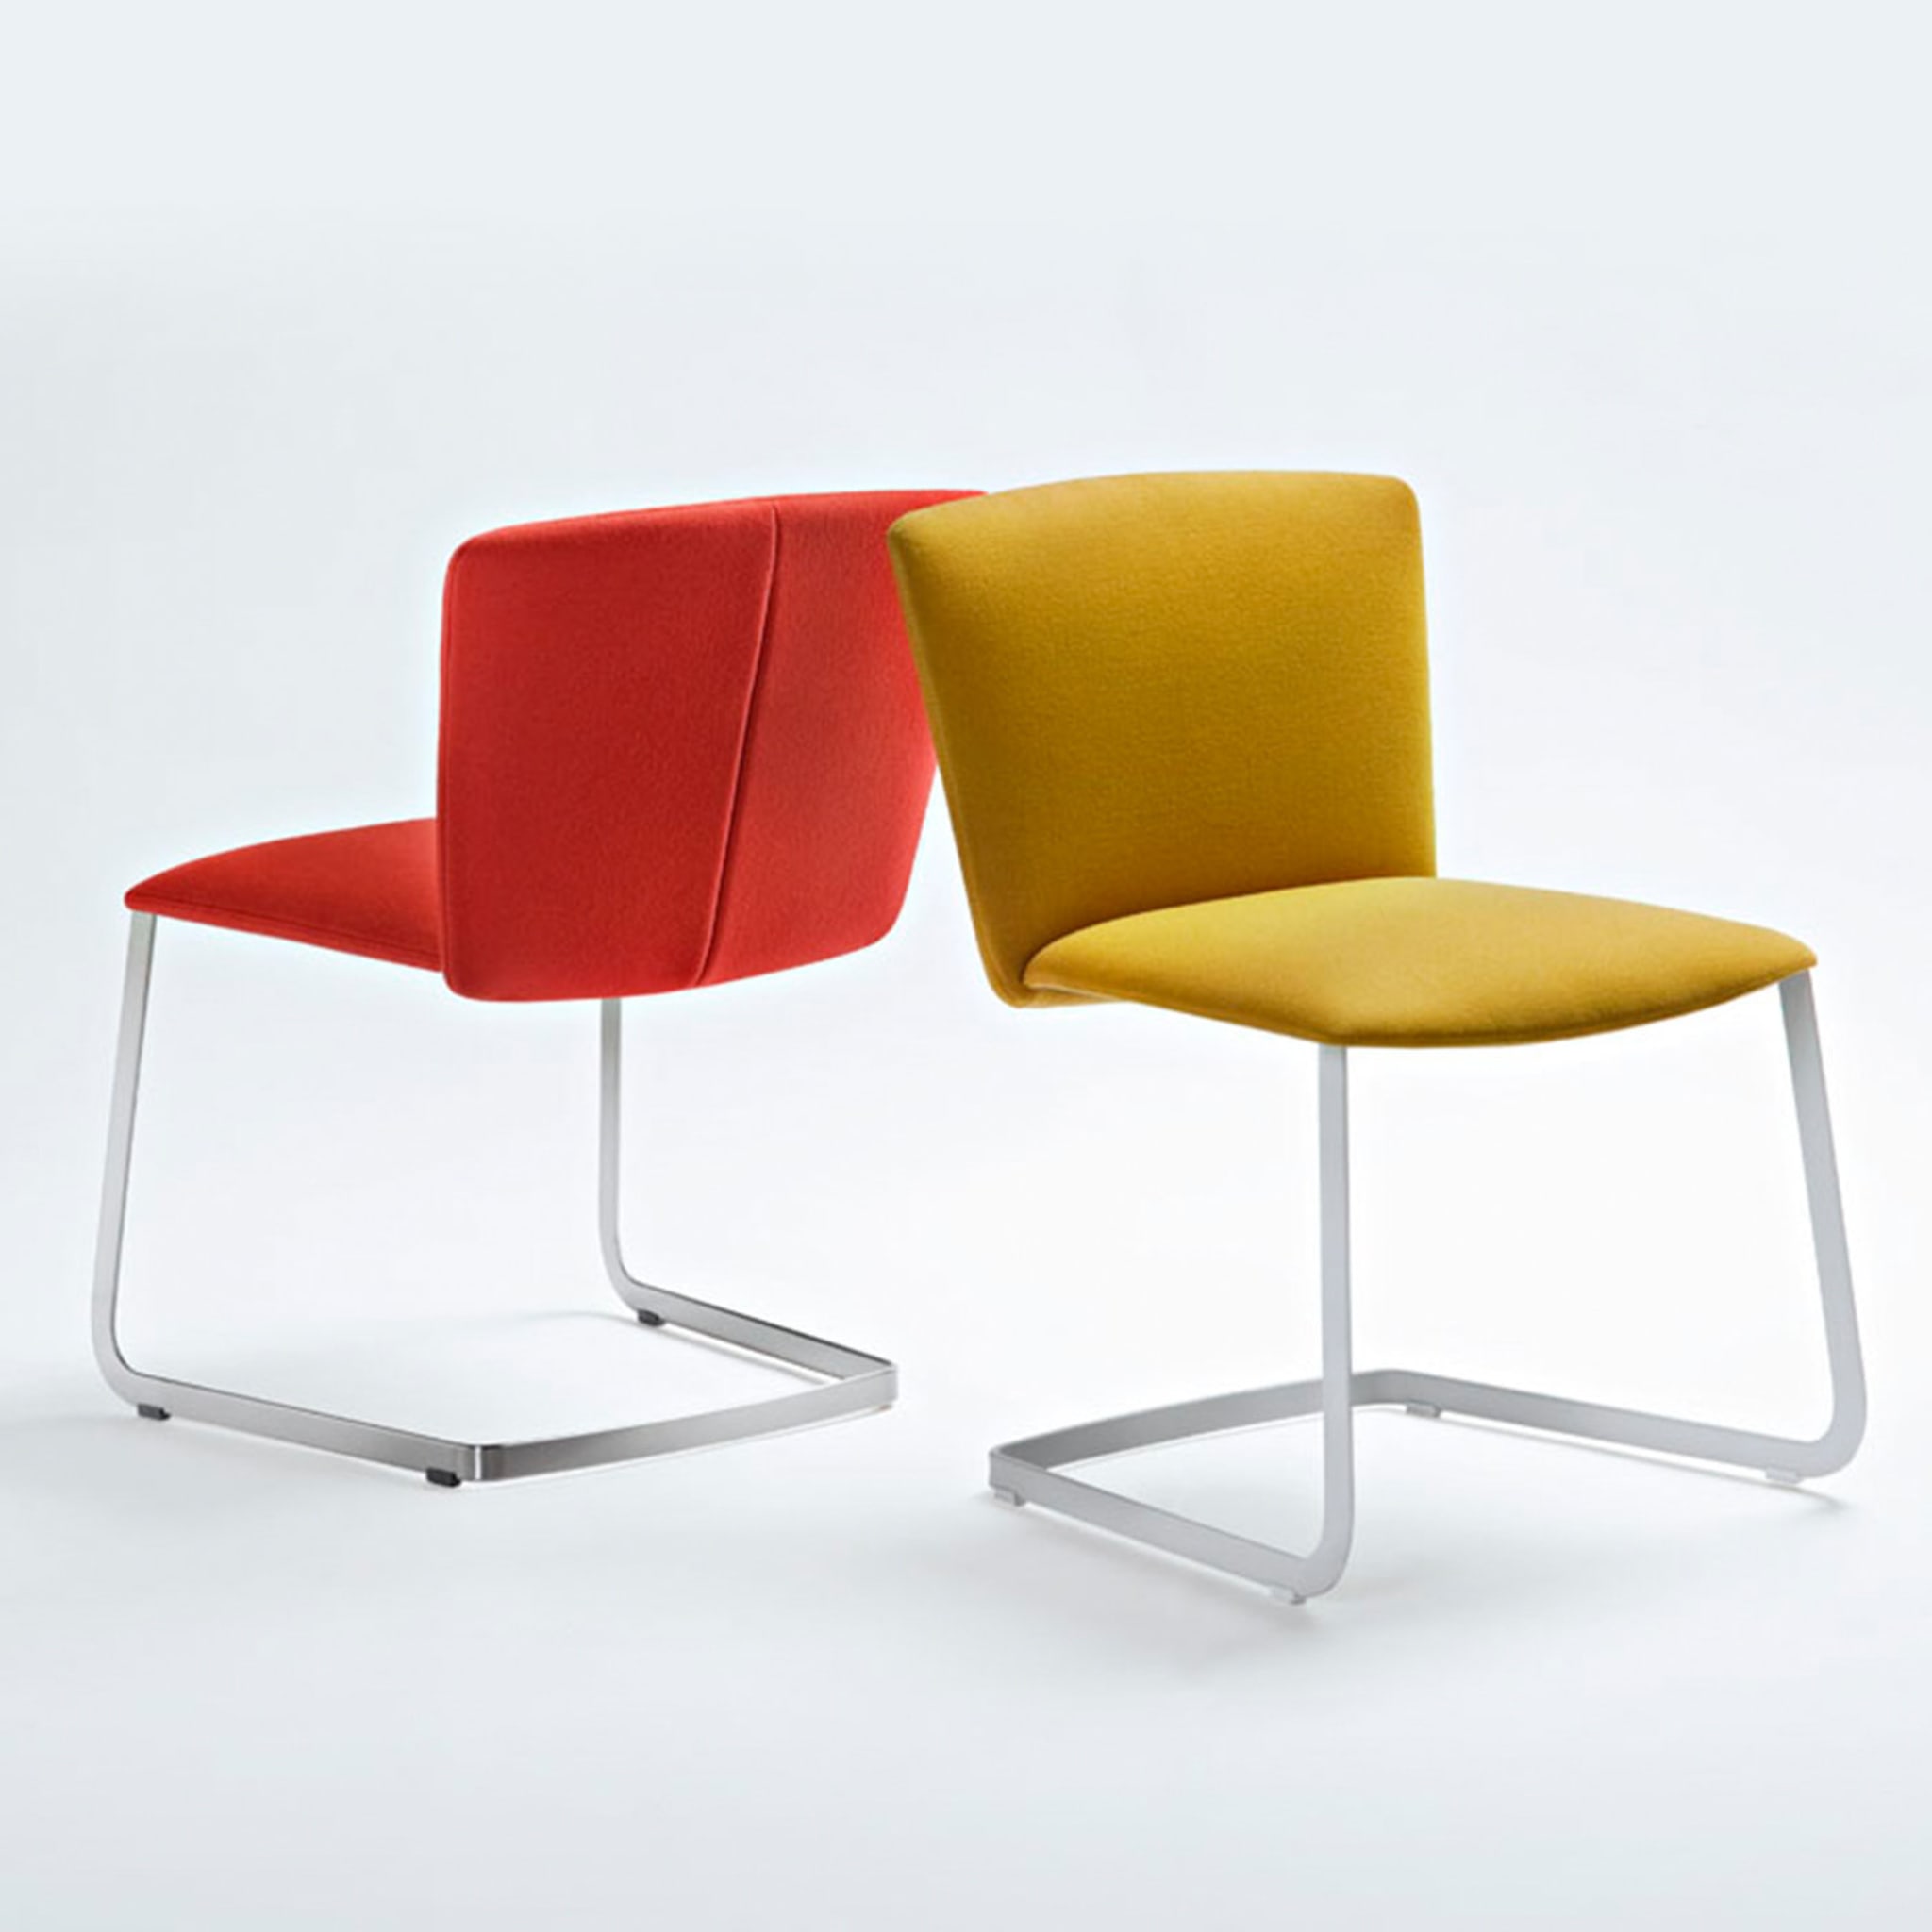 Vela Yellow Cantilever Chair by Lievore Altherr Molina - Alternative view 2